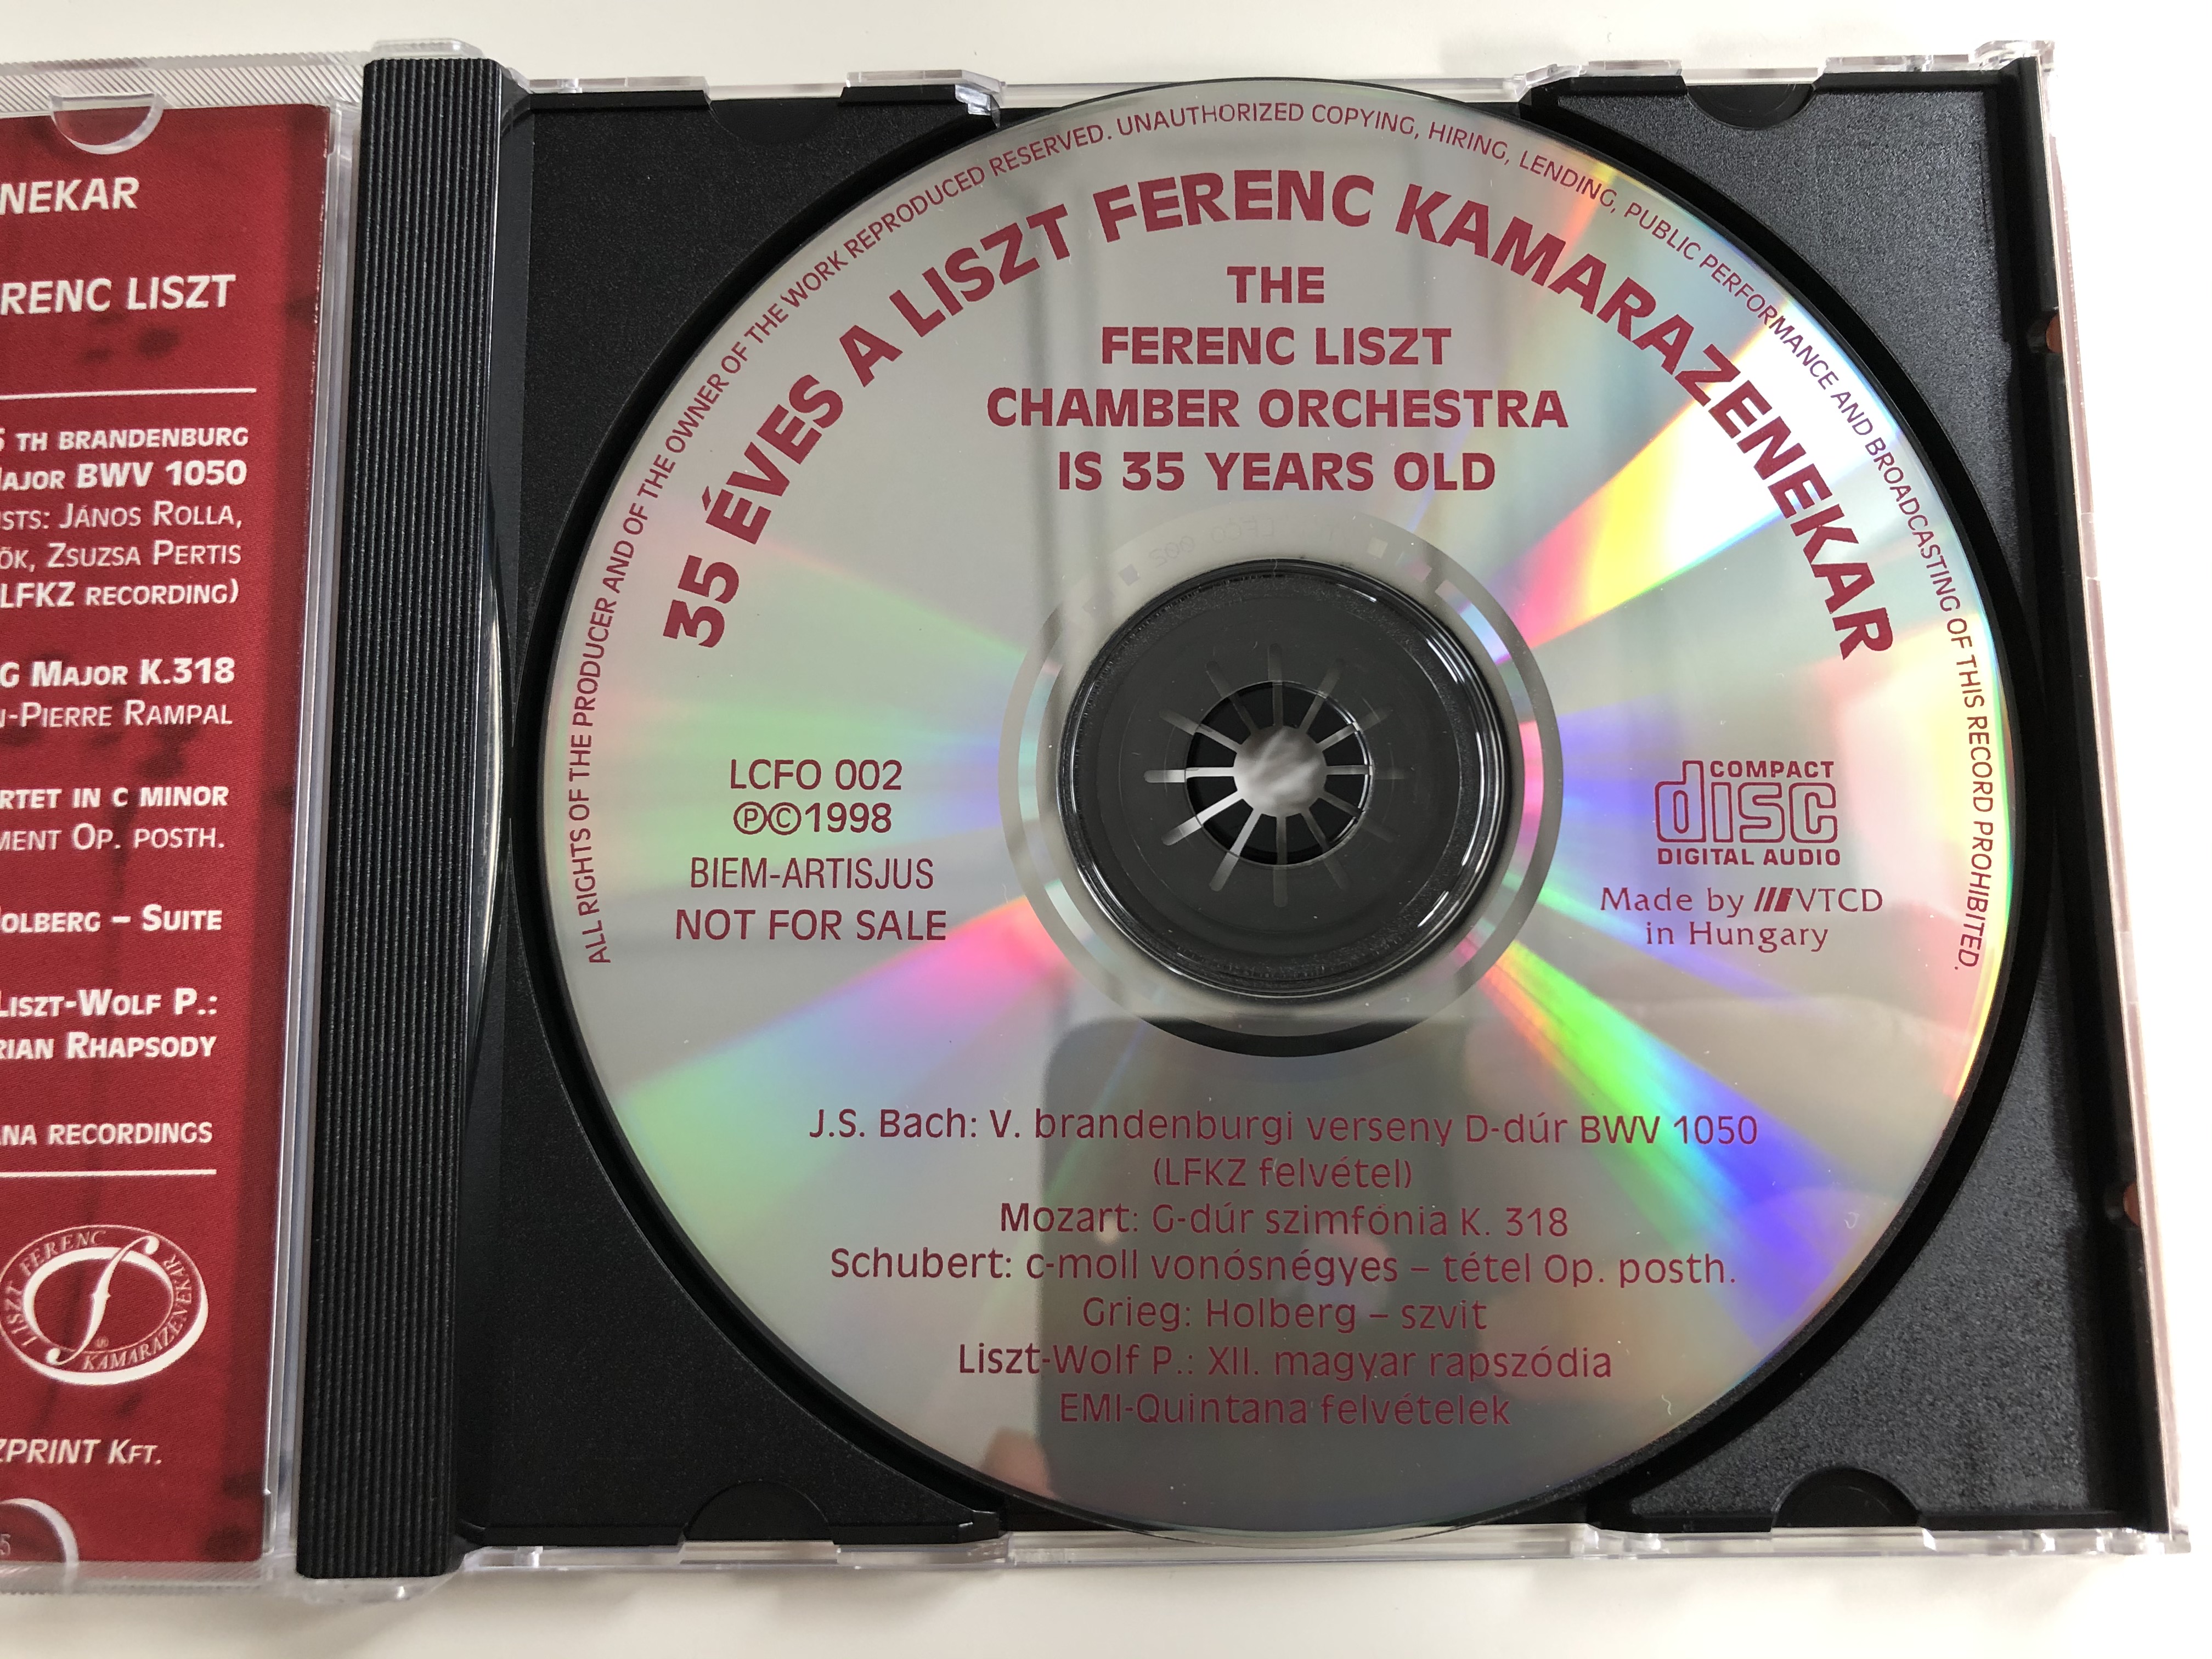 the-ferenc-liszt-chamber-orchestra-is-35-years-old-with-compliments-danubia-patent-and-trademark-attorneys-danubia-audio-cd-1998-lcfo-002-7-.jpg